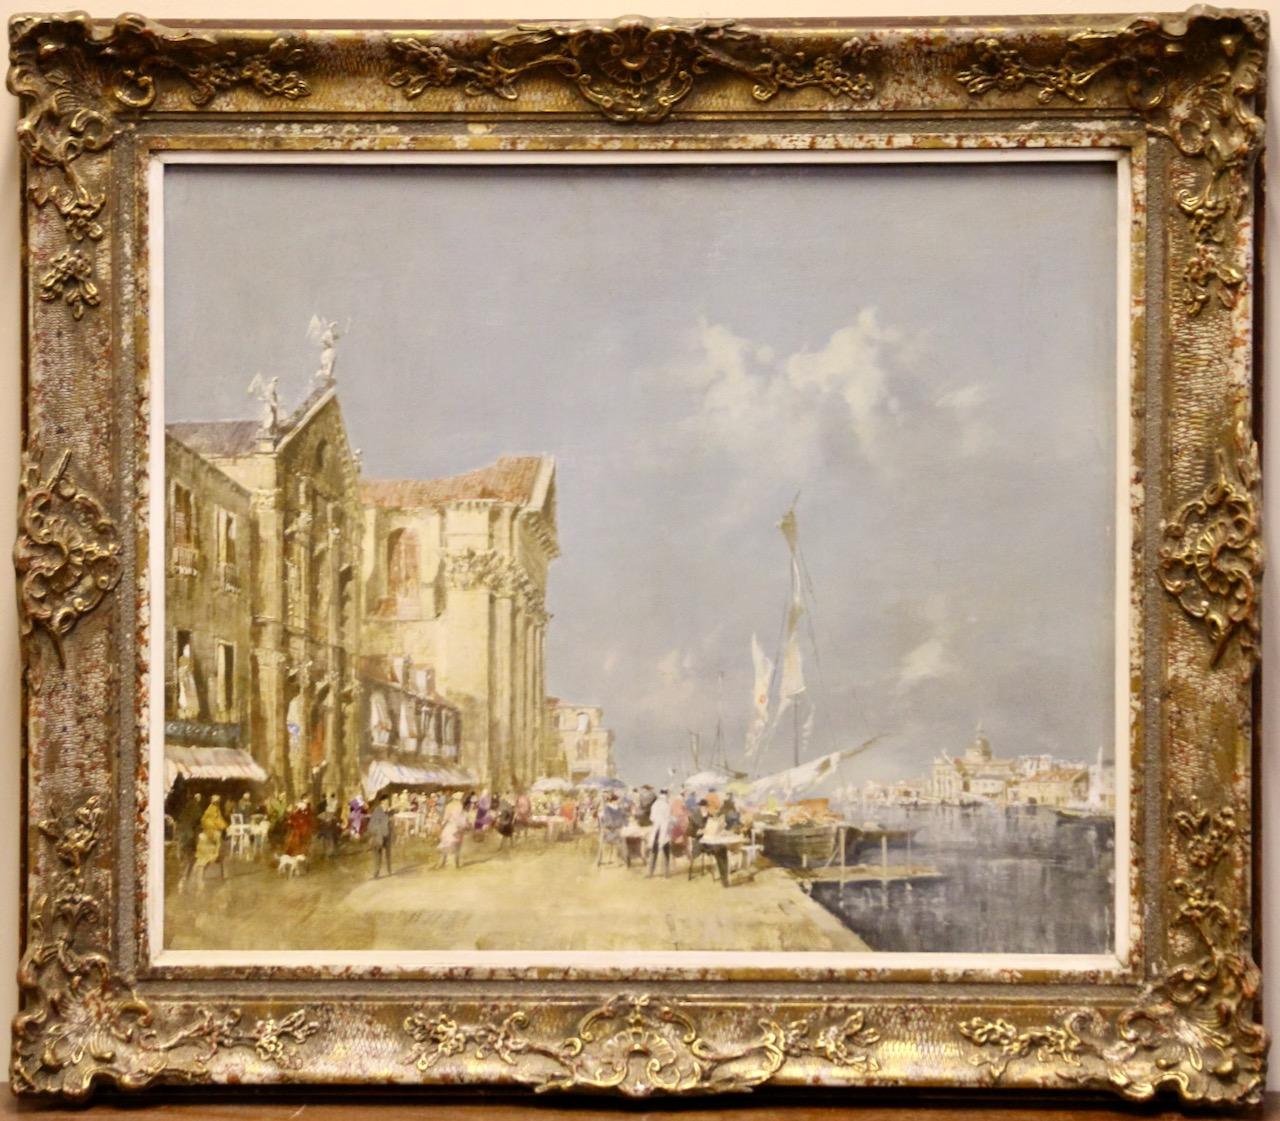 Peter Götz Pallmann, Venice, Busy harbor view with coffee Visitors

Dimensions without frame 50 x 60 cm
Dimensions with frame 67 x 77 cm